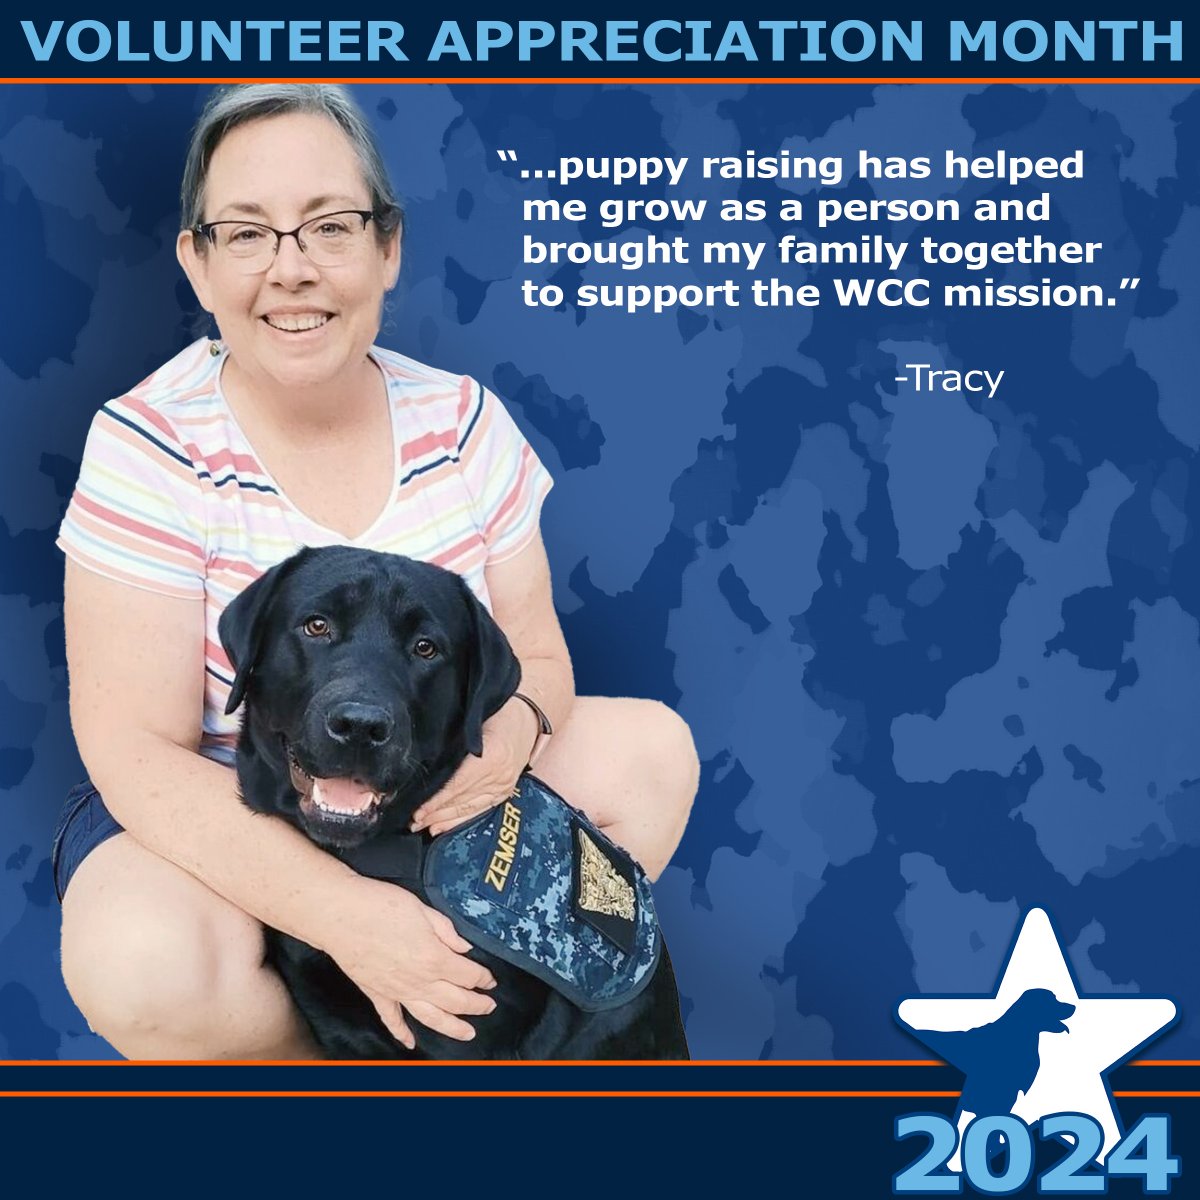 April is #VolunteerAppreciationMonth, and we will be shining a light on our volunteers all month long!

Thank you, Tracy, for all that you do! We are happy and grateful to have you as part of our pack!

#FurTheLoveOfVeterans #GlobalVolunteerMonth